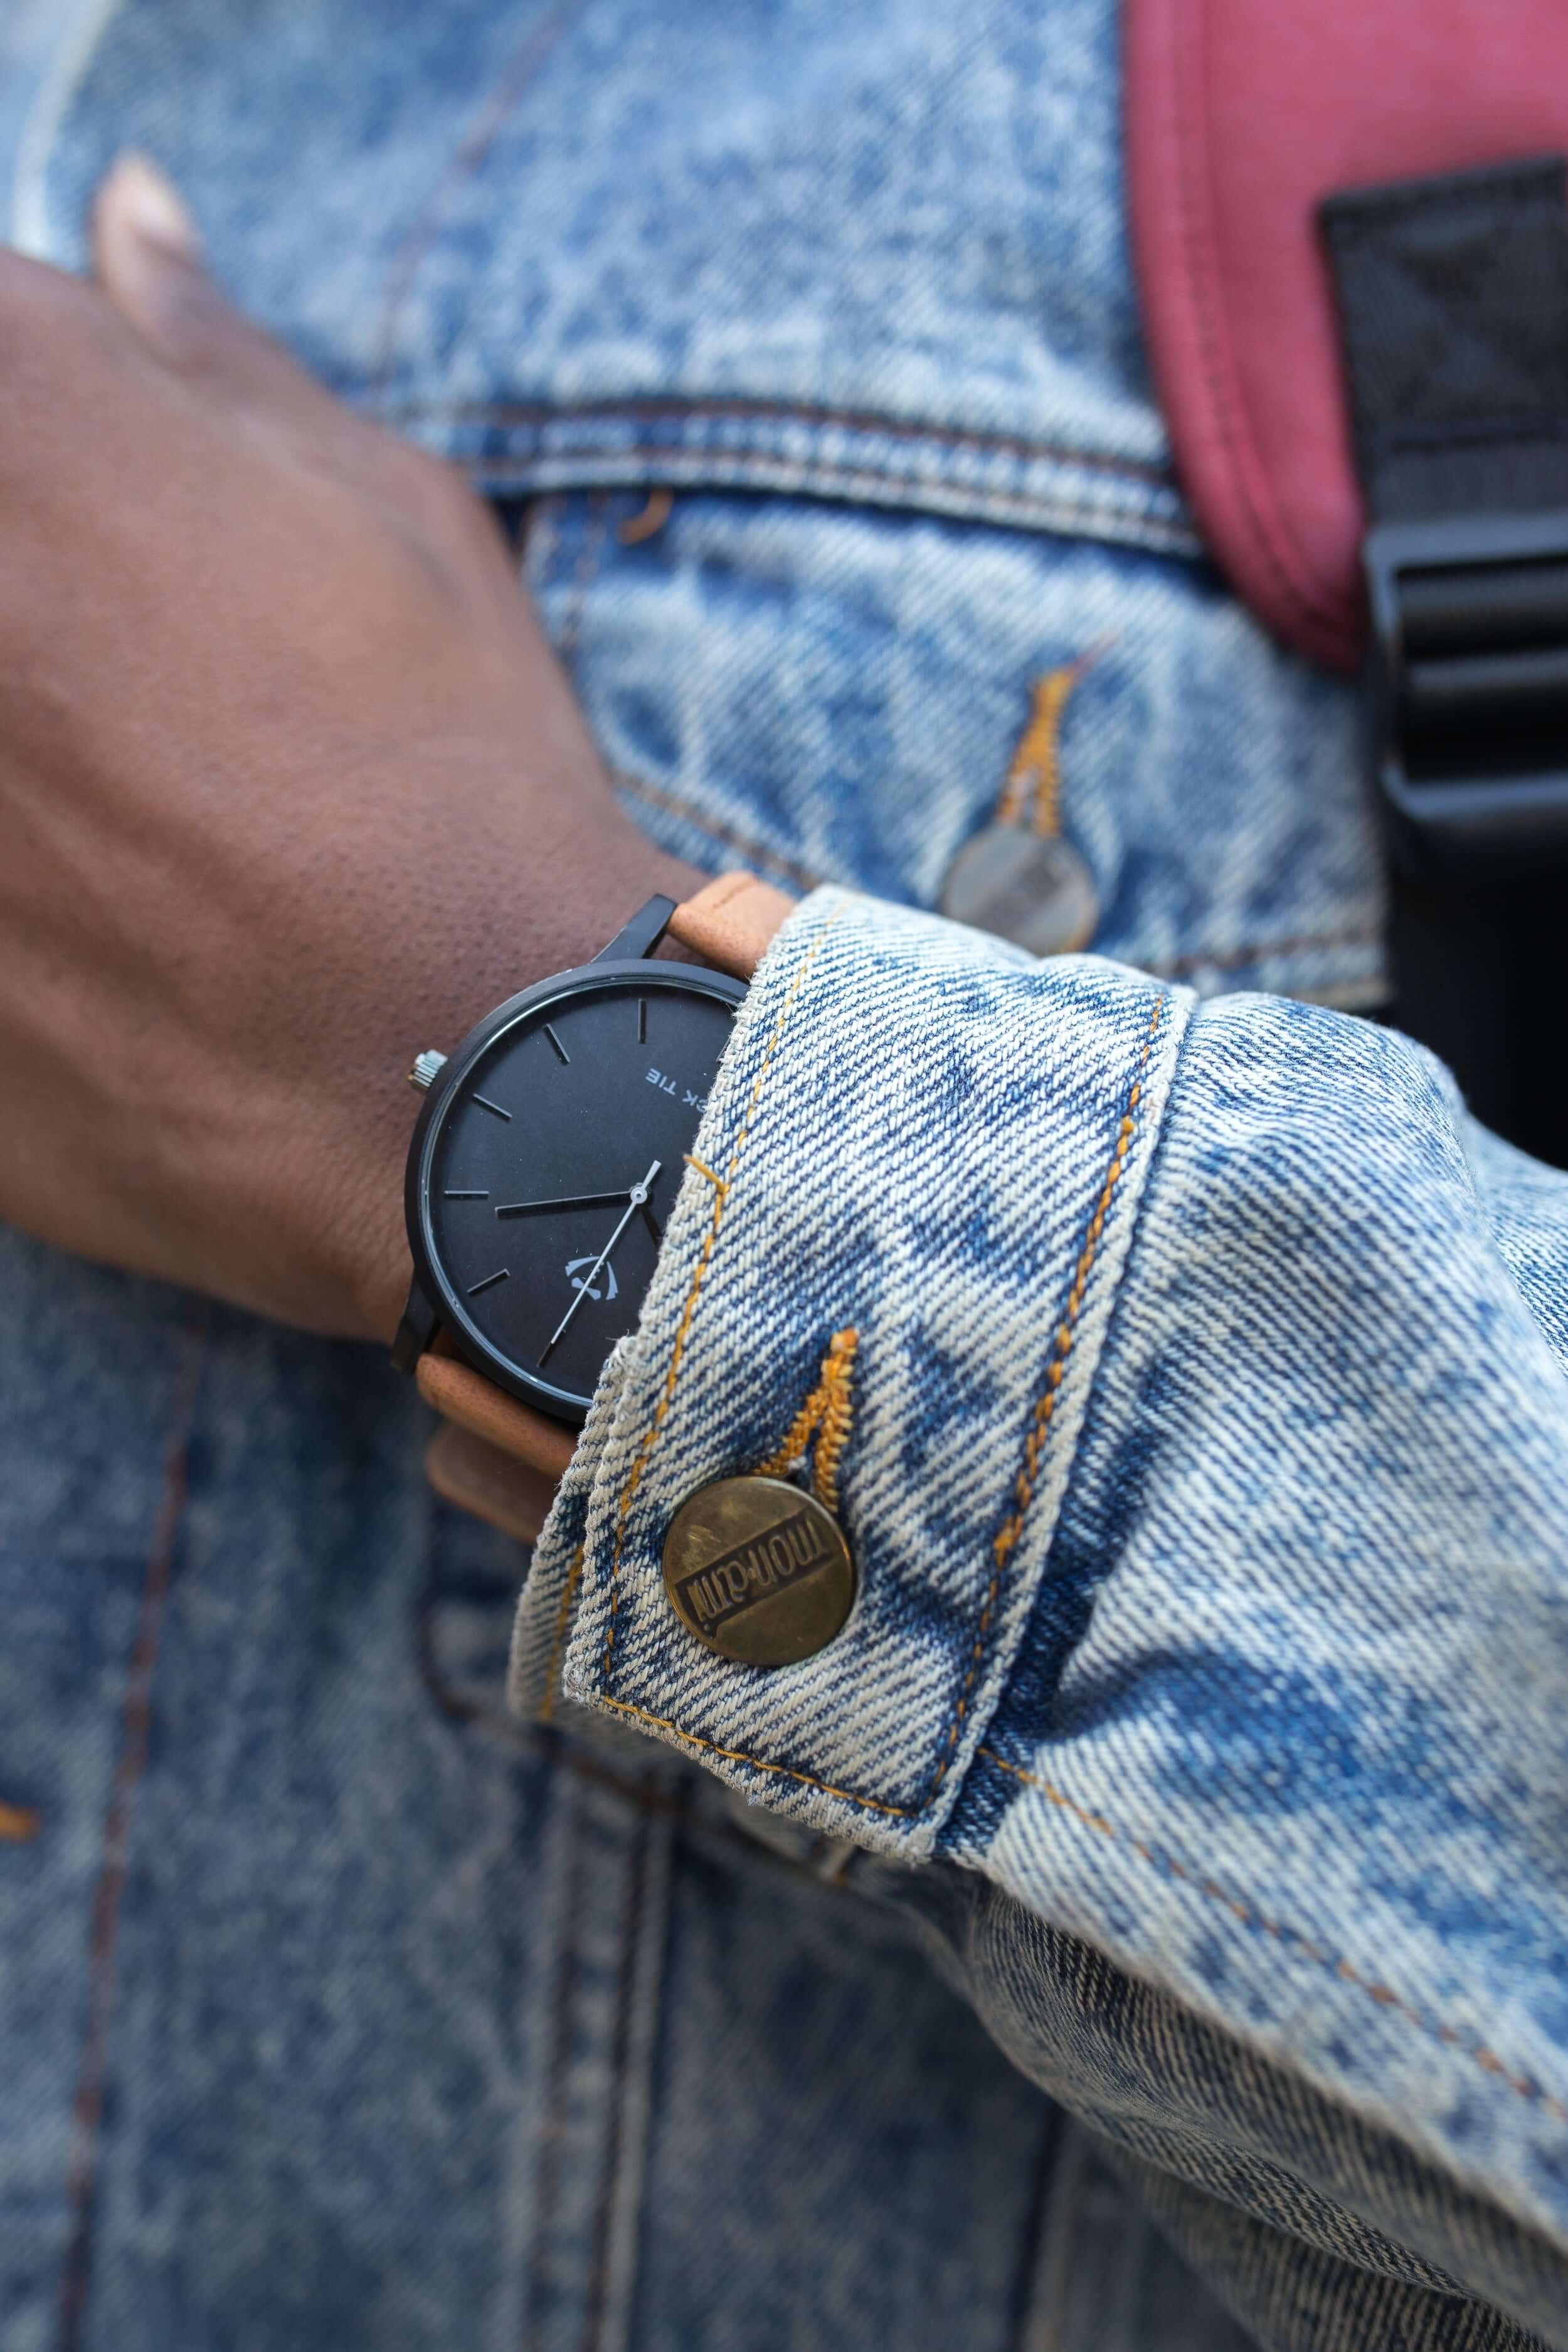 Watch Black-on-Black Watches for Men